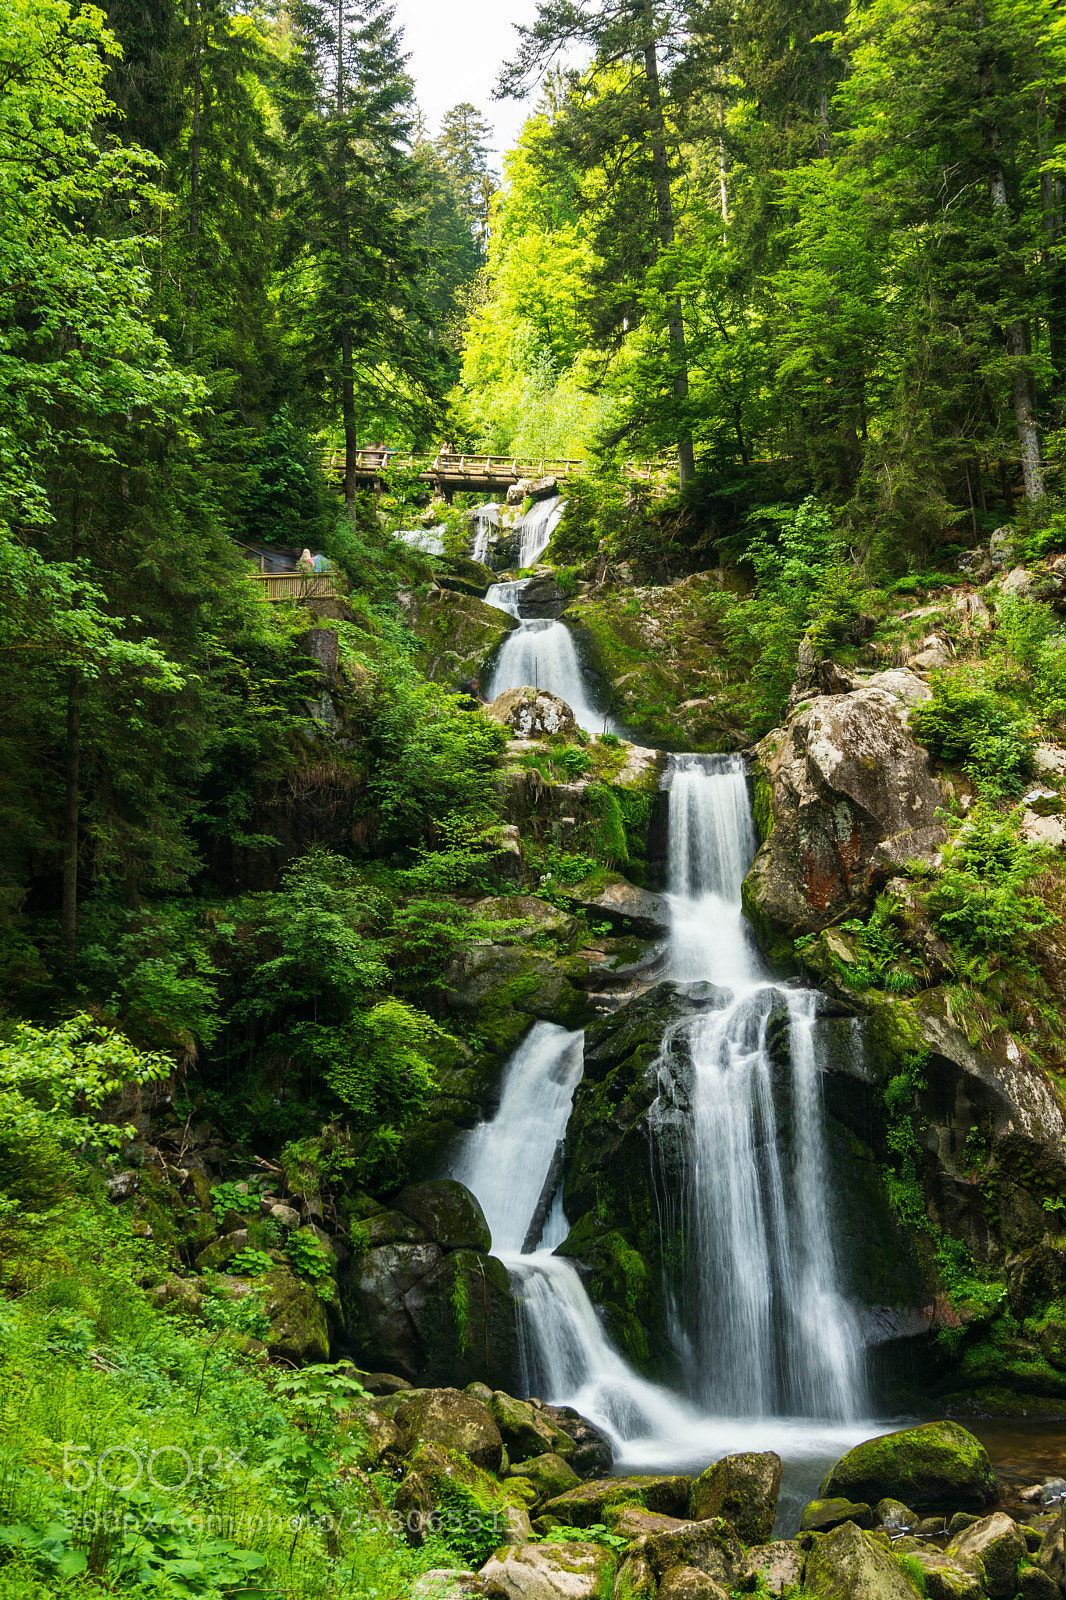 Sony a6300 sample photo. Triberg waterfall in germany photography